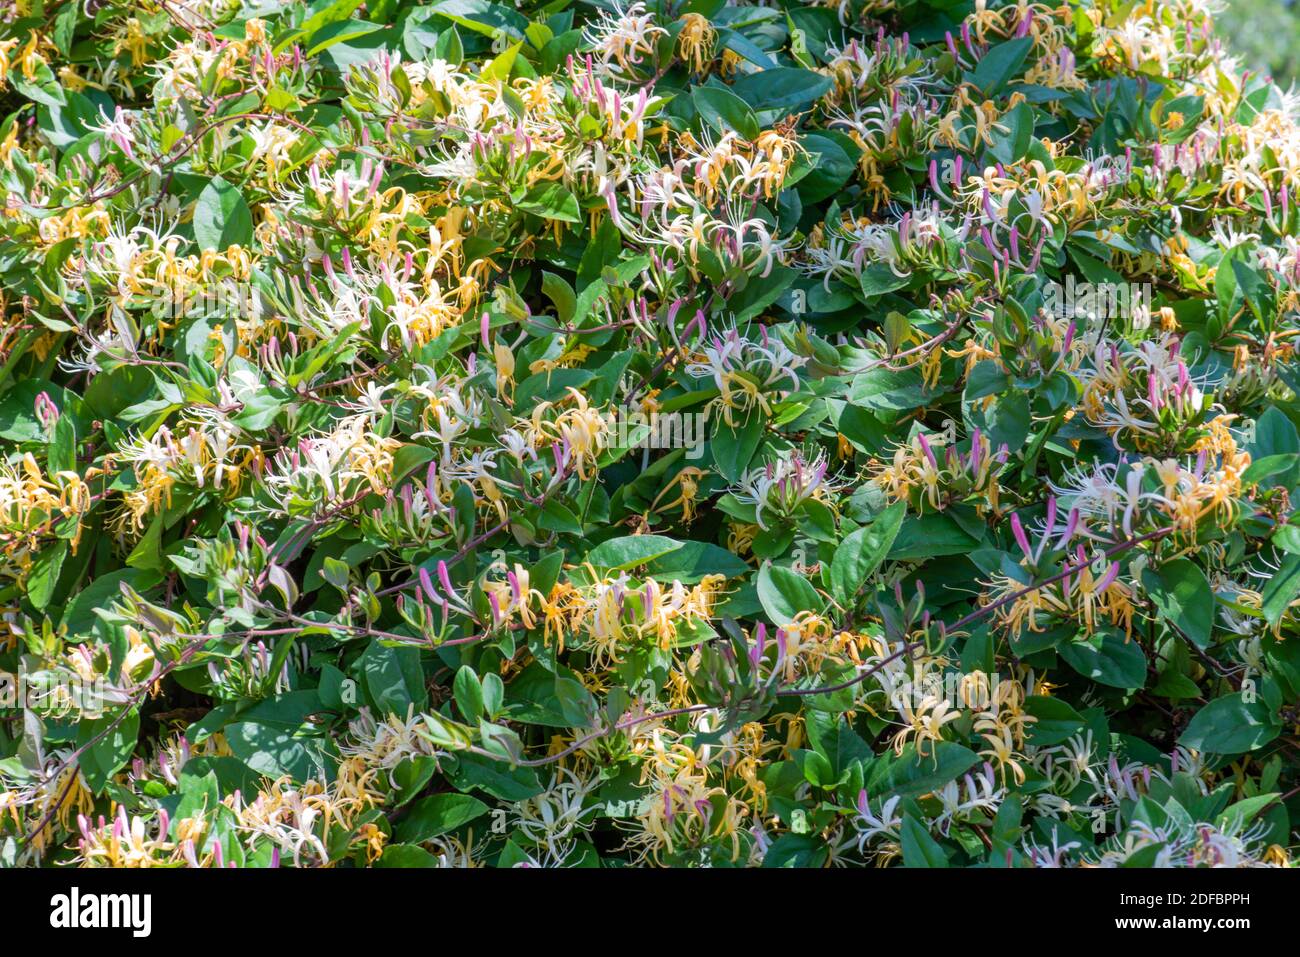 Blooming lonicera honeysuckle as background, climbing plants in garden Stock Photo